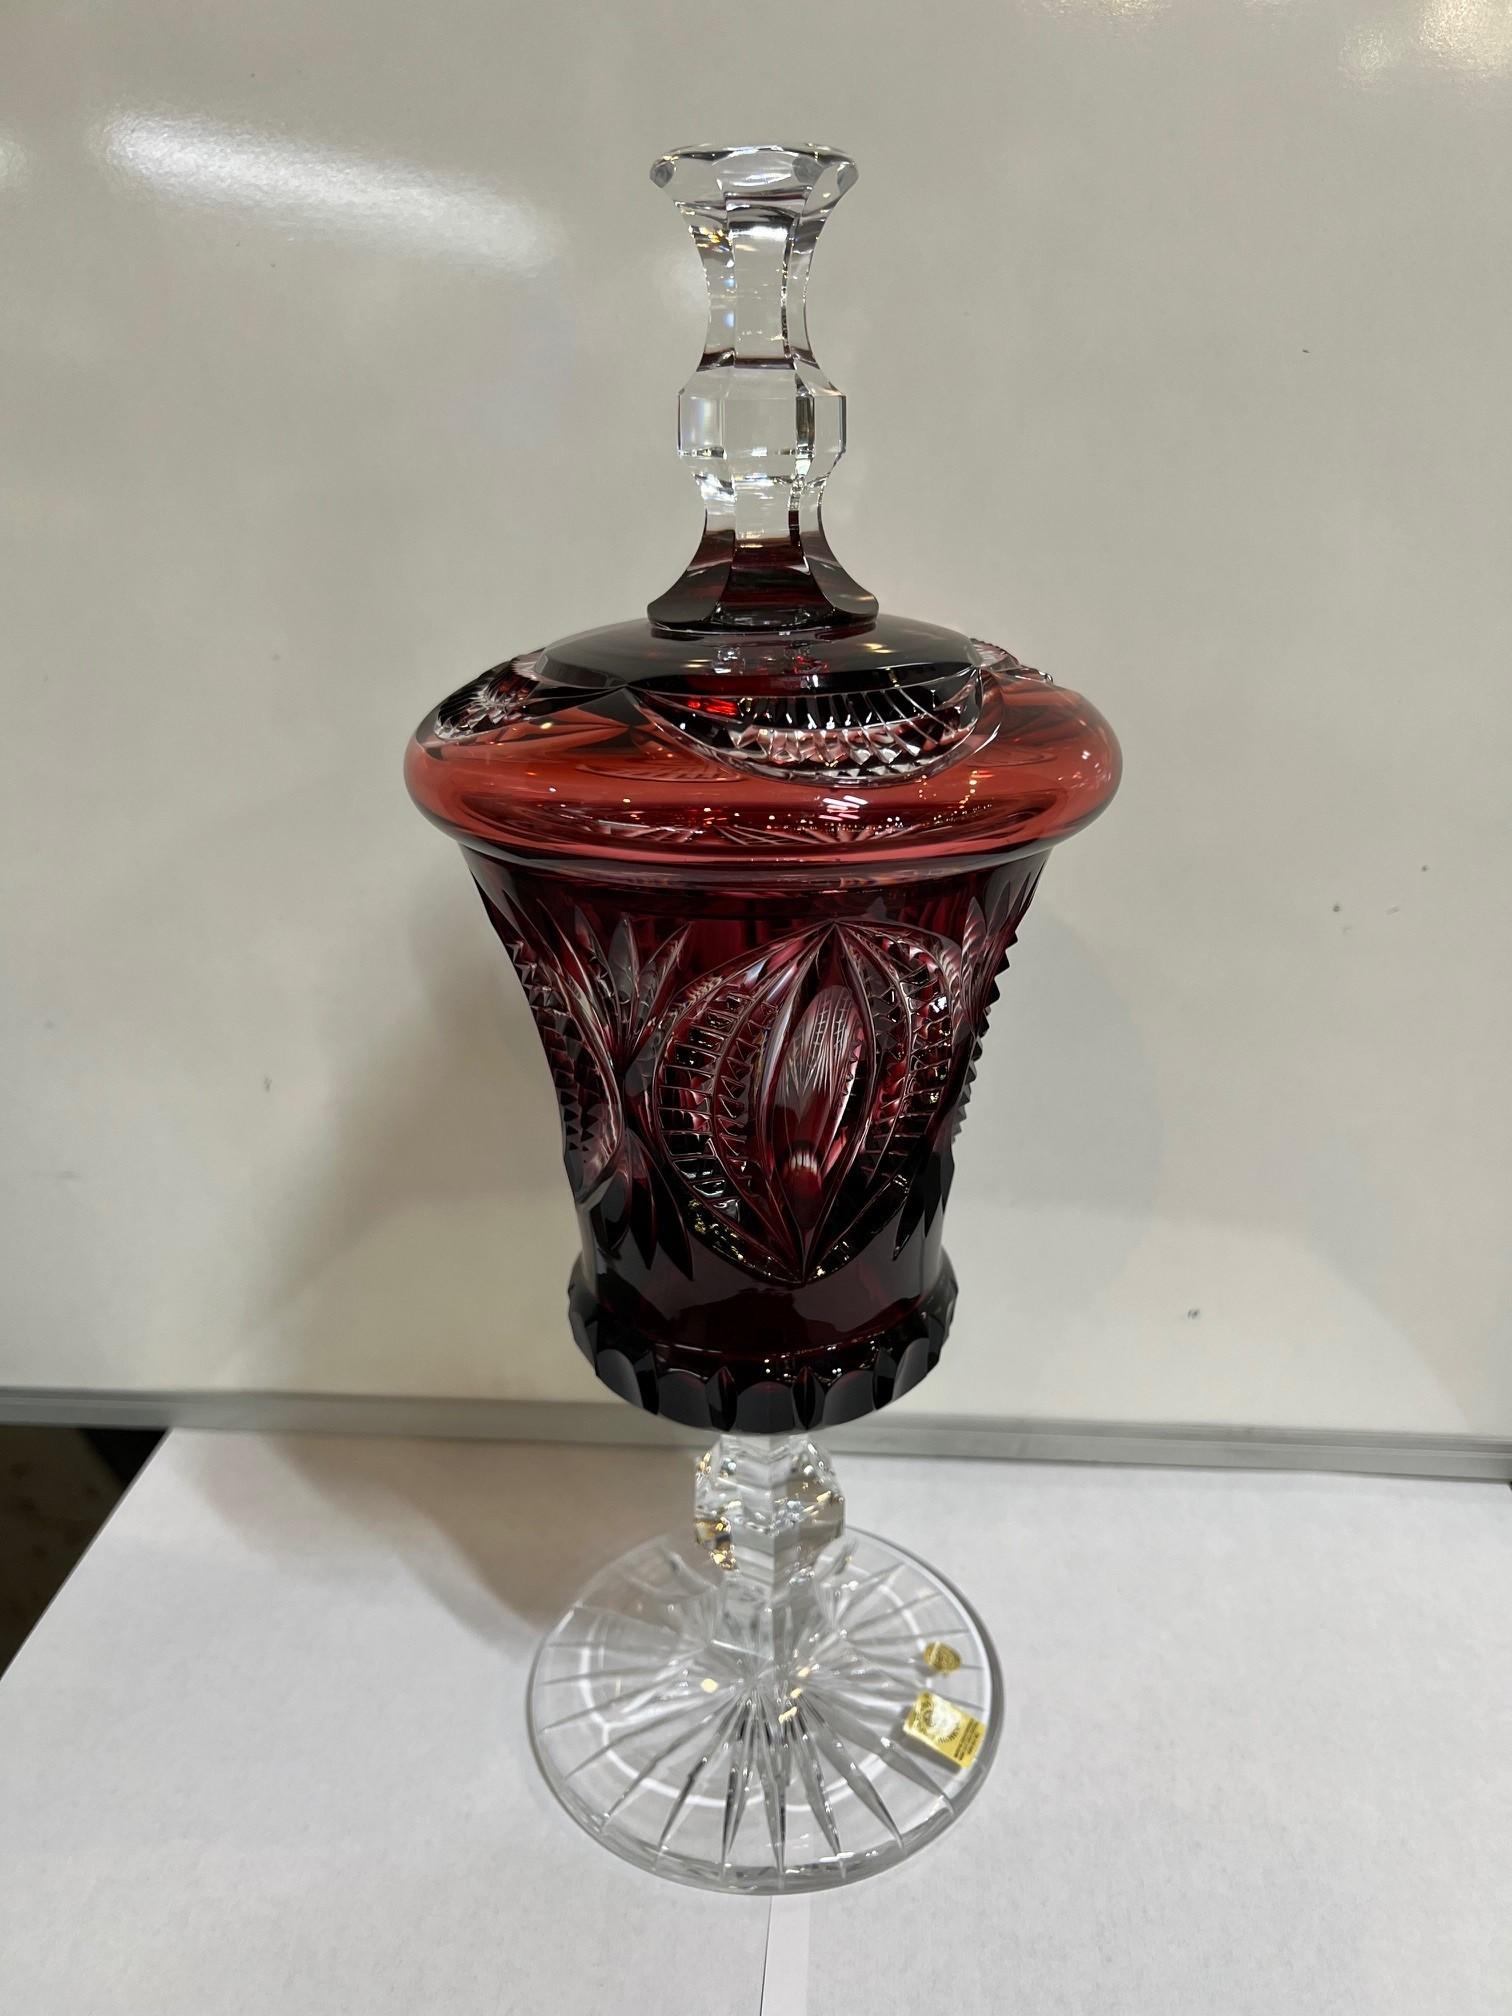 Stunning hand cut lead crystal pedestal urn or candy dish with a cover created as a work of art by the hands of the finest Czech glass workers. The Caesar Crystal Company in the Czech Republic has been selling hand cut lead crystal pieces since 1861